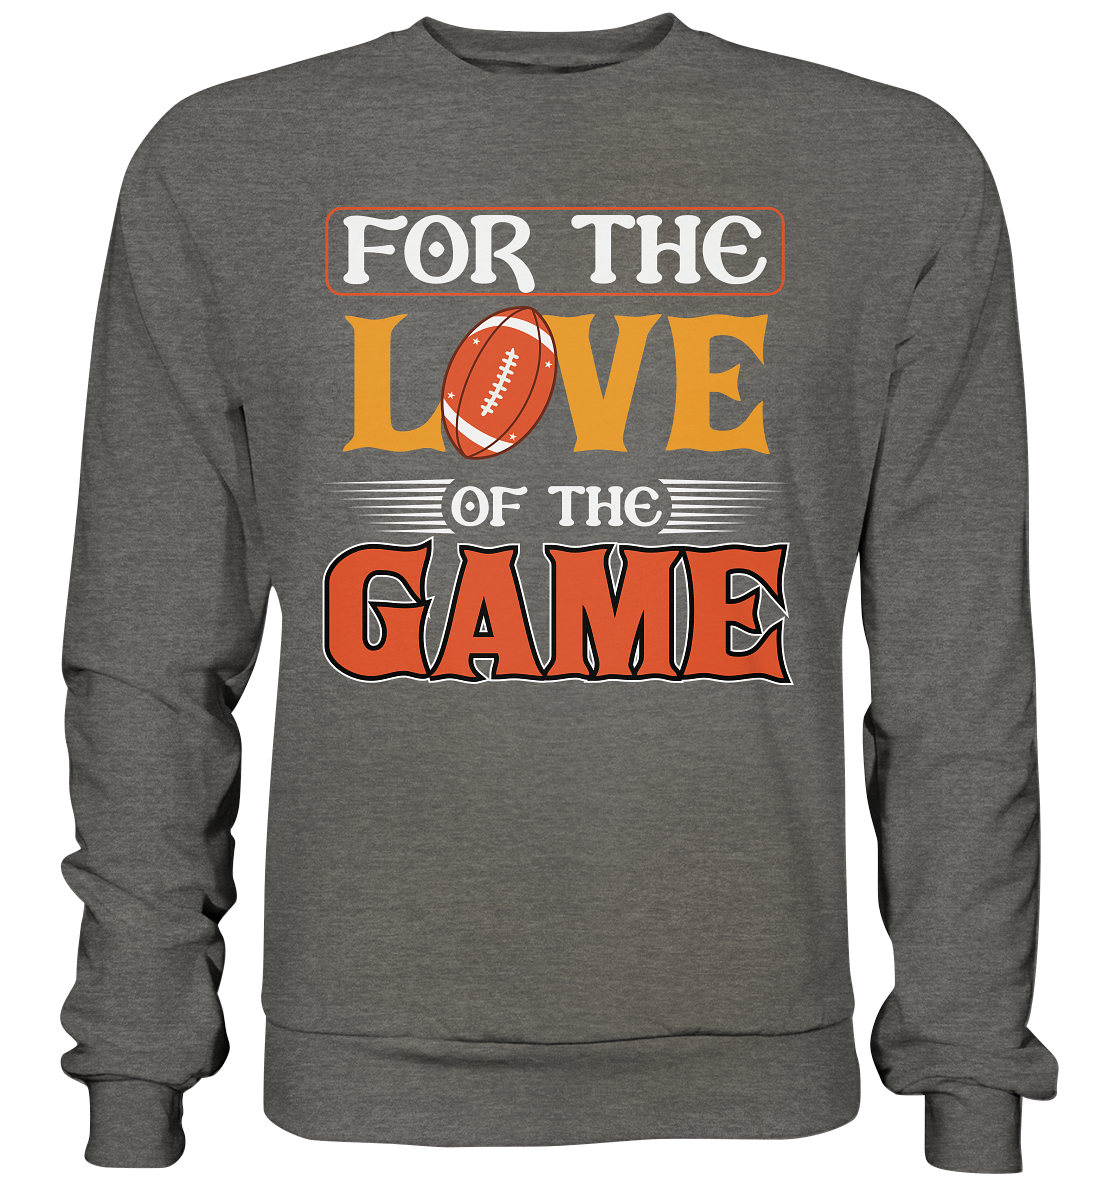 For the Love of the Game - Basic Sweatshirt - Football Unity Football Unity